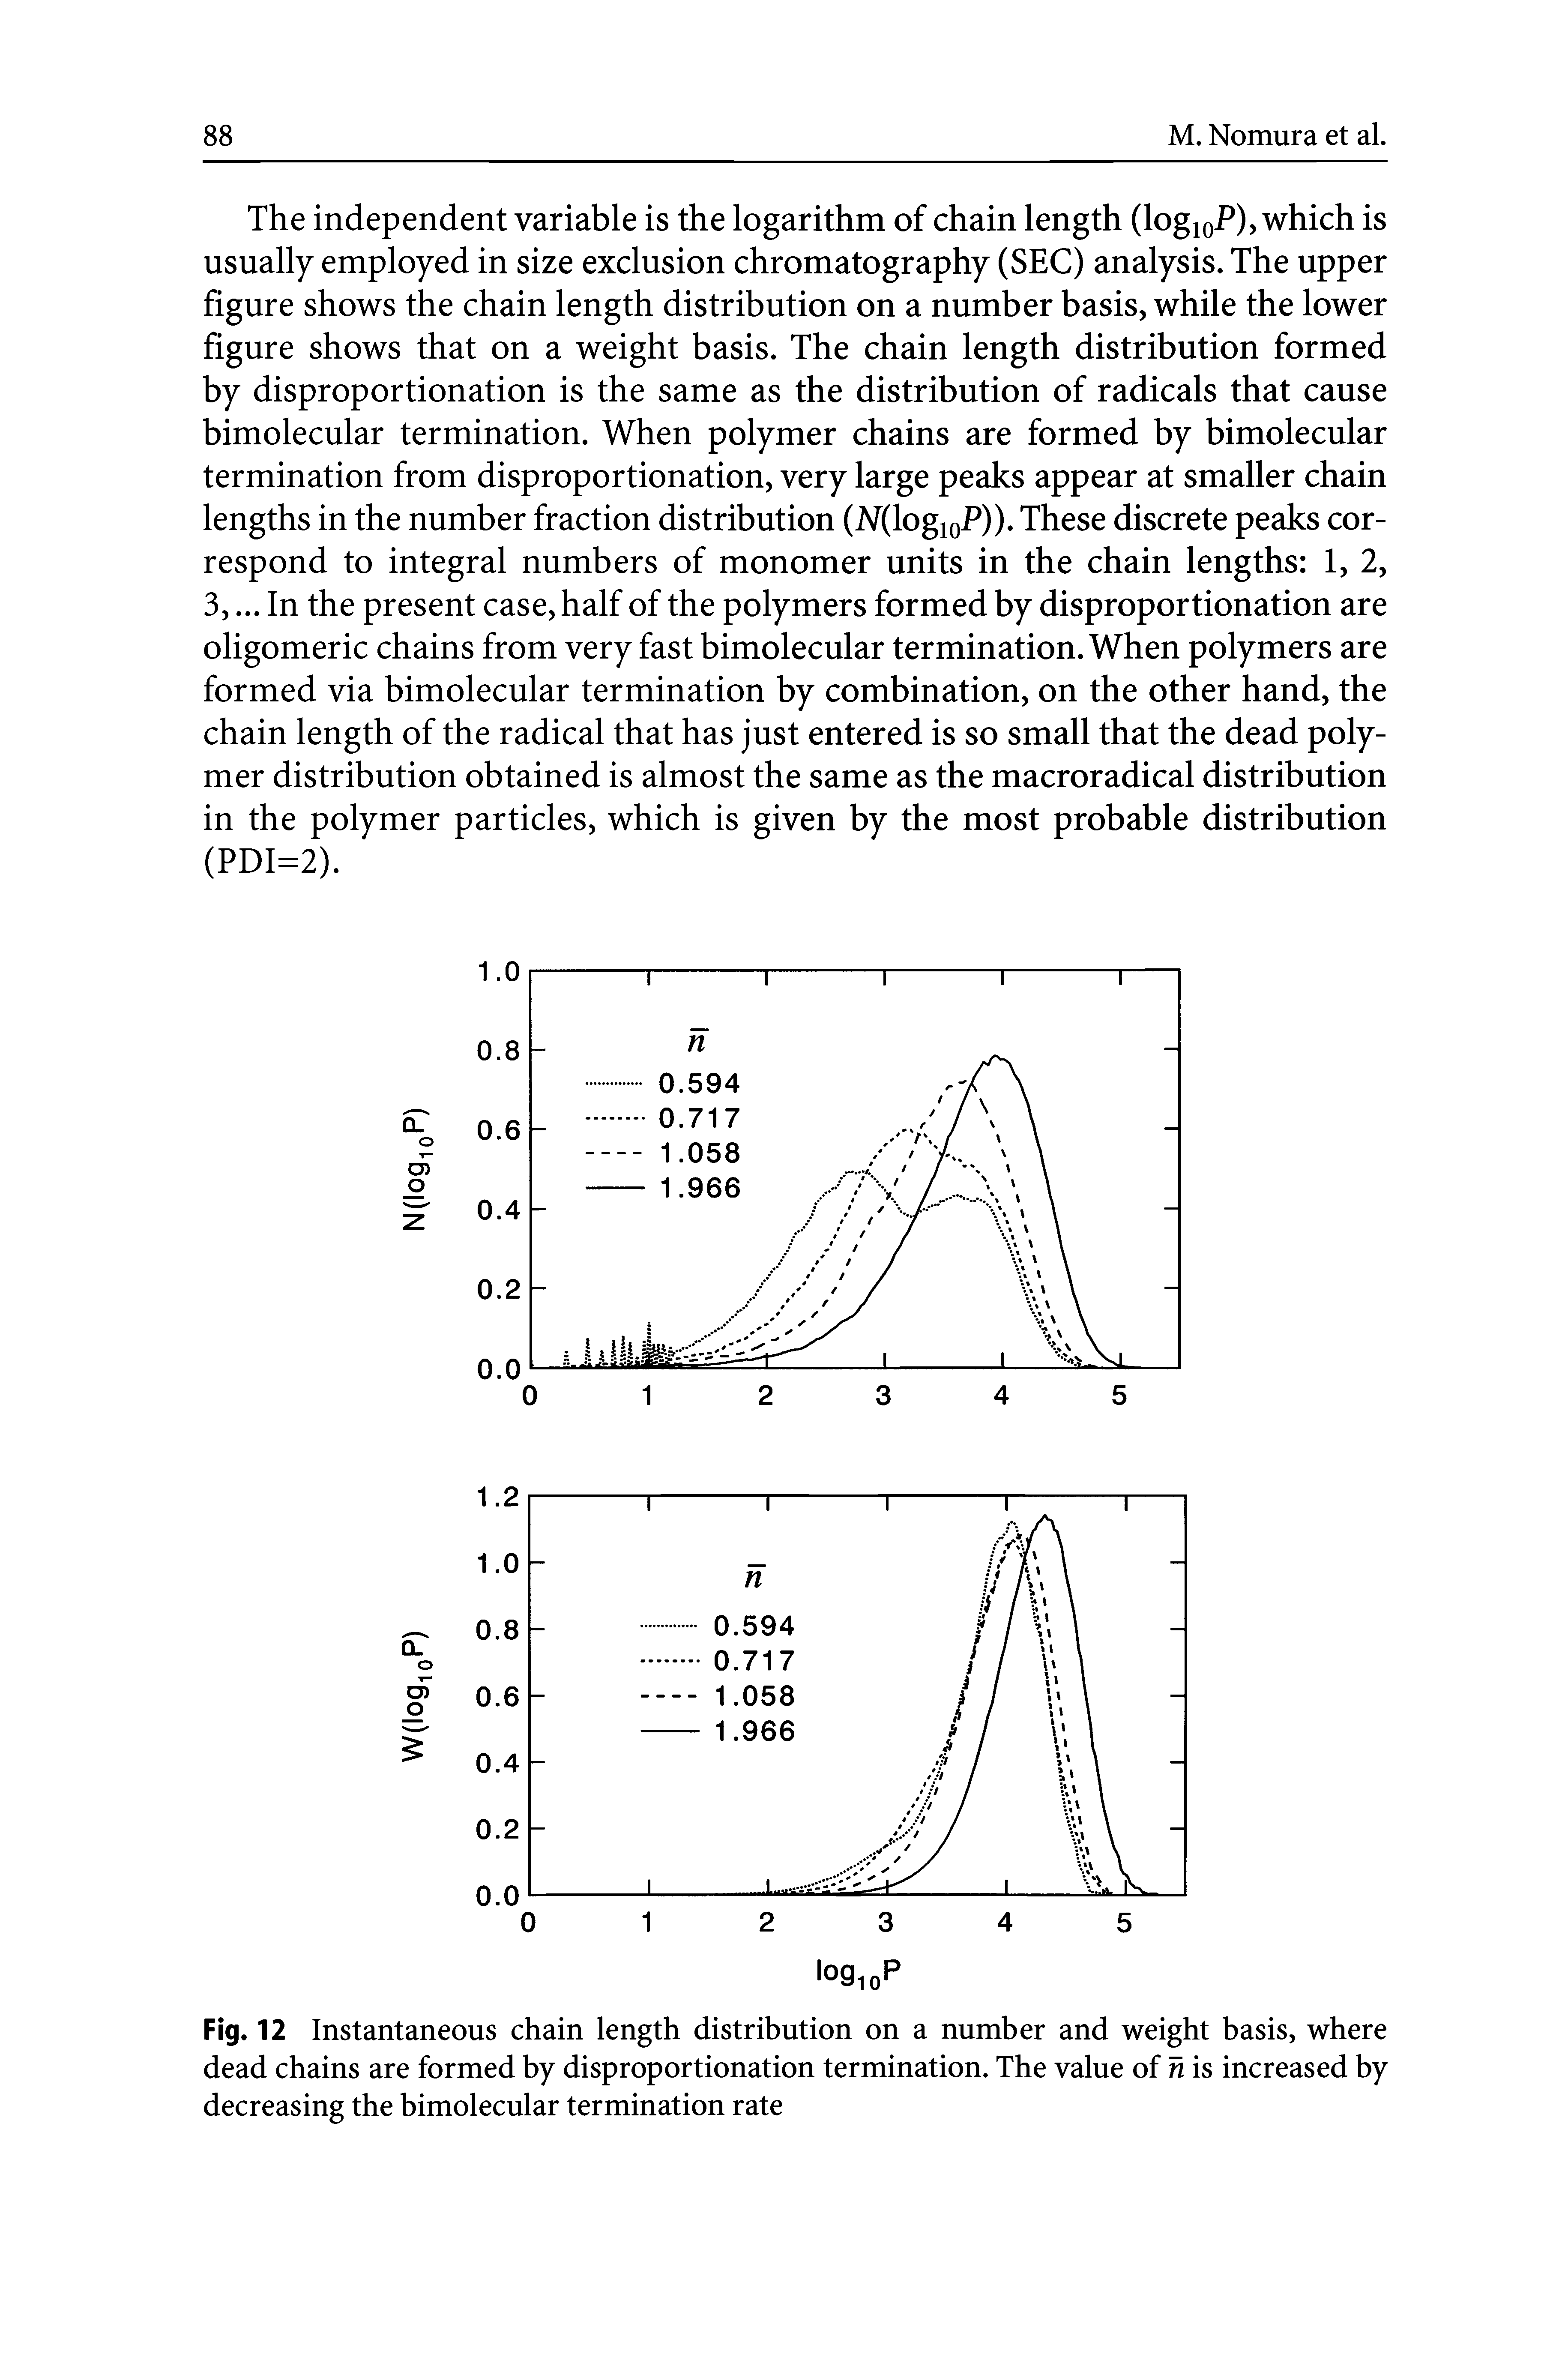 Fig. 12 Instantaneous chain length distribution on a number and weight basis, where dead chains are formed by disproportionation termination. The value of n is increased by decreasing the bimolecular termination rate...